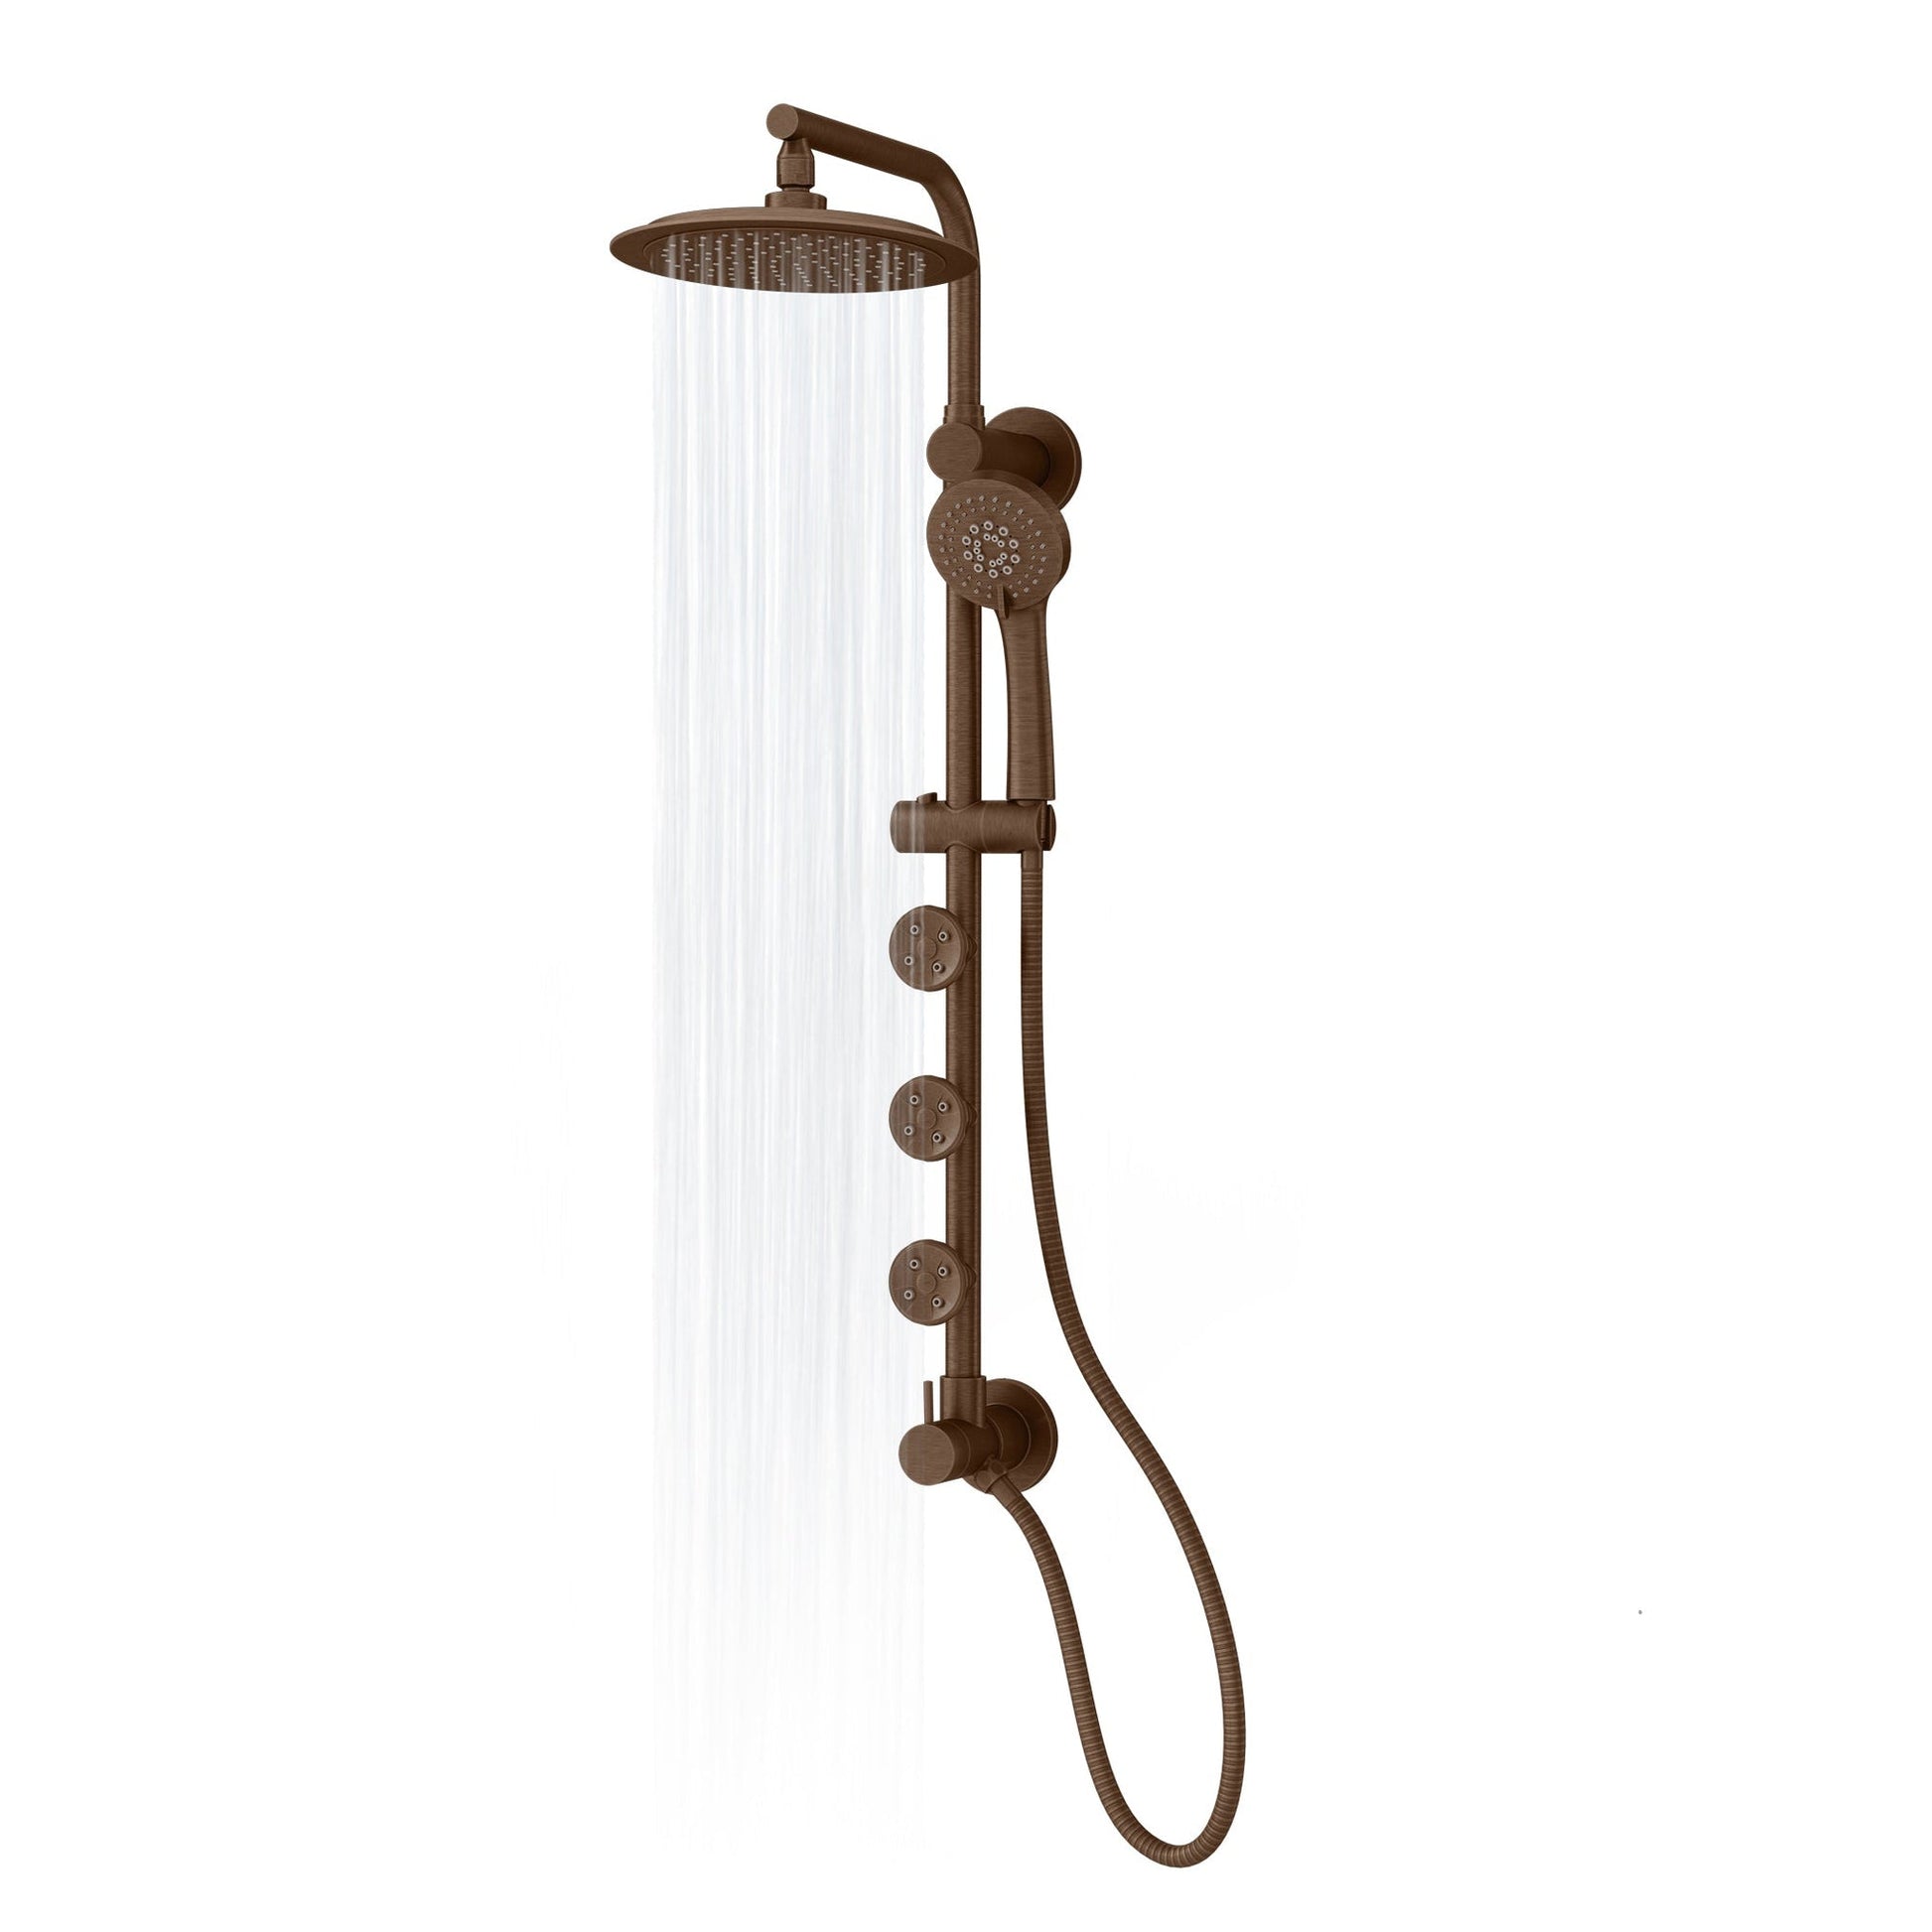 PULSE ShowerSpas Lanai 2.5 GPM Shower System in Oil Rubbed Bronze With 3-Power Spray Body Jets and 3-Function Hand Shower